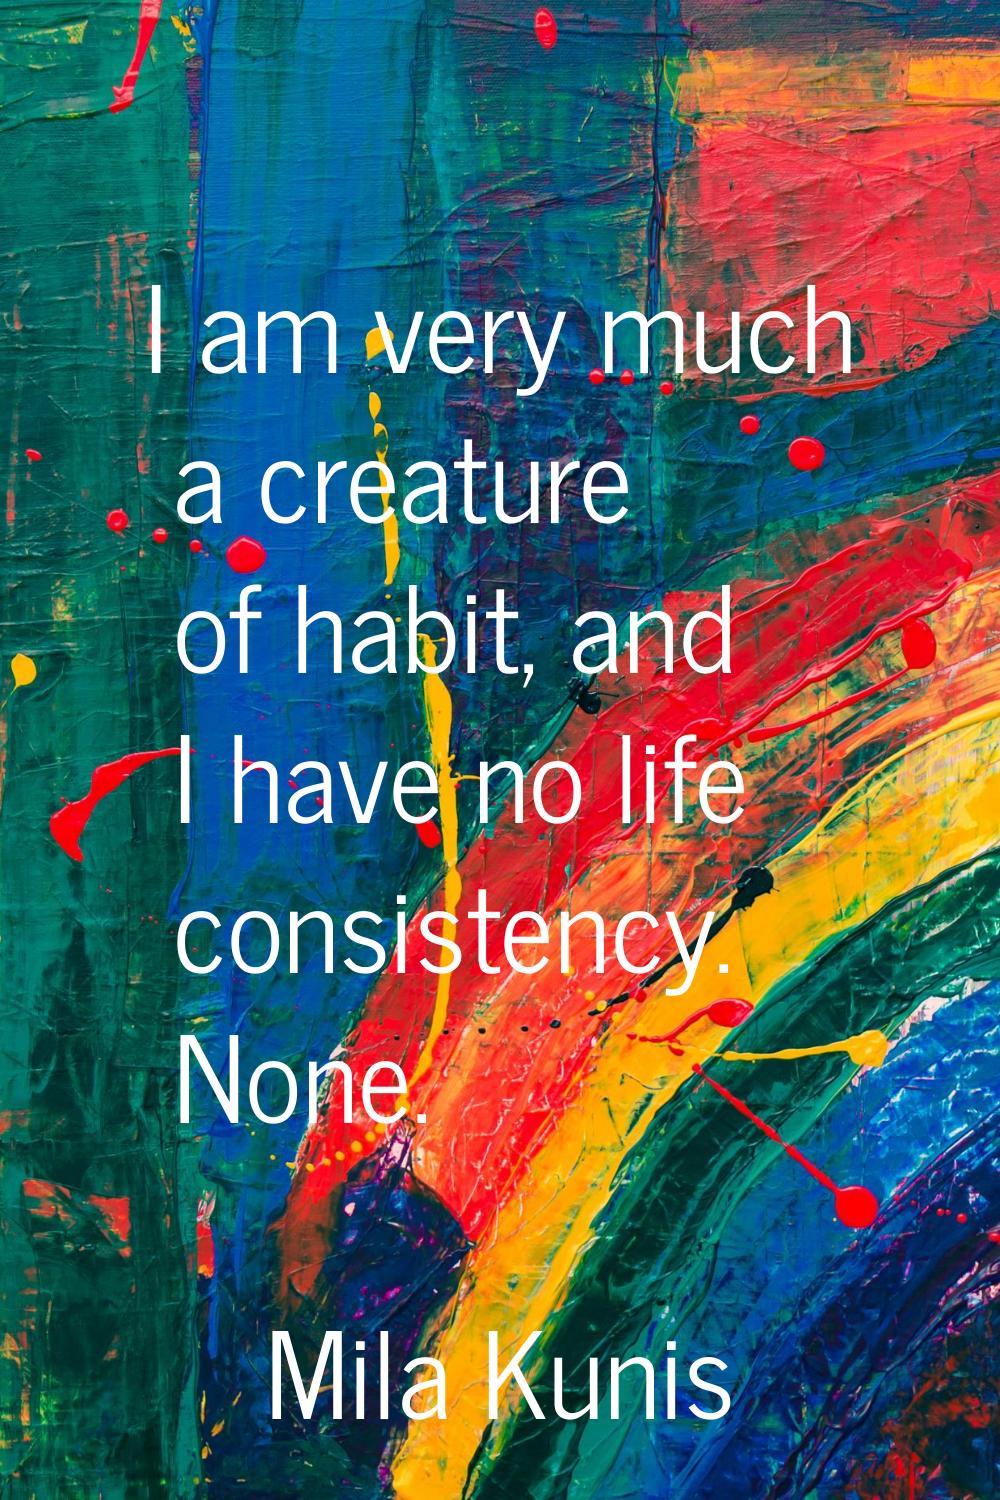 I am very much a creature of habit, and I have no life consistency. None.